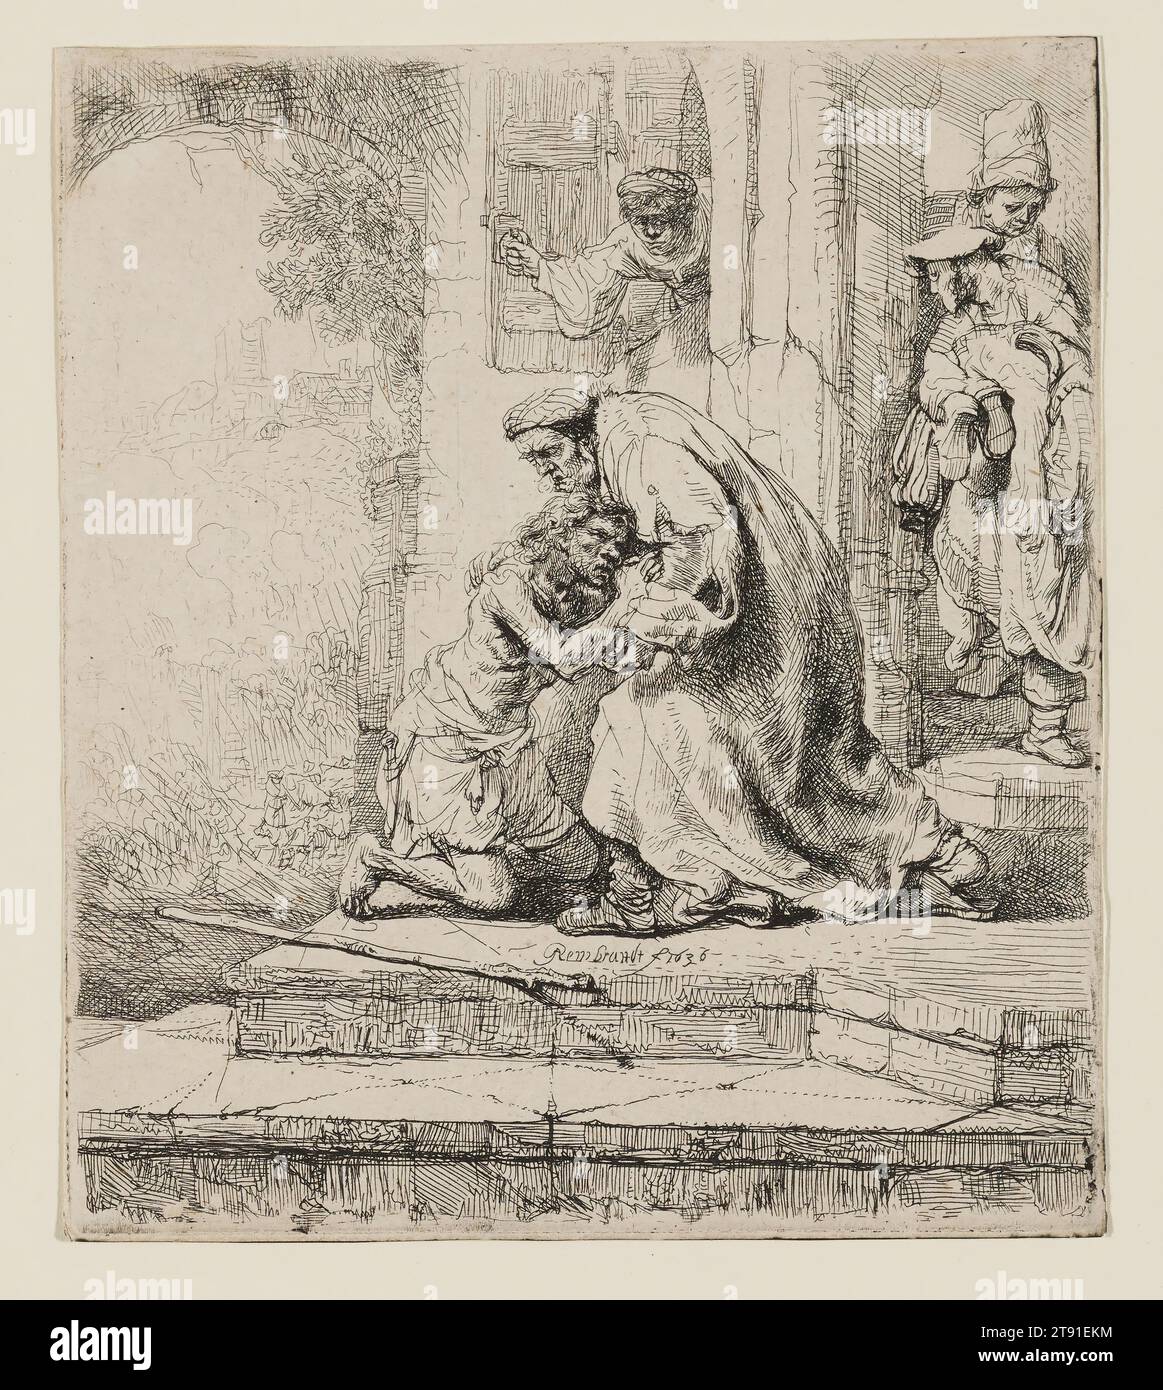 The Return of the Prodigal Son, 1636, Rembrandt Harmensz. van Rijn, Dutch, 1606–1669, 6 1/8 x 5 3/8 in. (15.6 x 13.6 cm) (plate), Etching, The Netherlands, 17th century, Protestant Europe loved the parable of the Prodigal Son because it so perfectly crystallized the Reformation doctrine that salvation comes to those who have faith. In the parable, a ragged son returns home after spending his inheritance on debauchery and sin. Amazingly, he is forgiven, simply because he believes in his father's mercy and love. Rembrandt's print shows servants bringing the repentant son new clothes Stock Photo